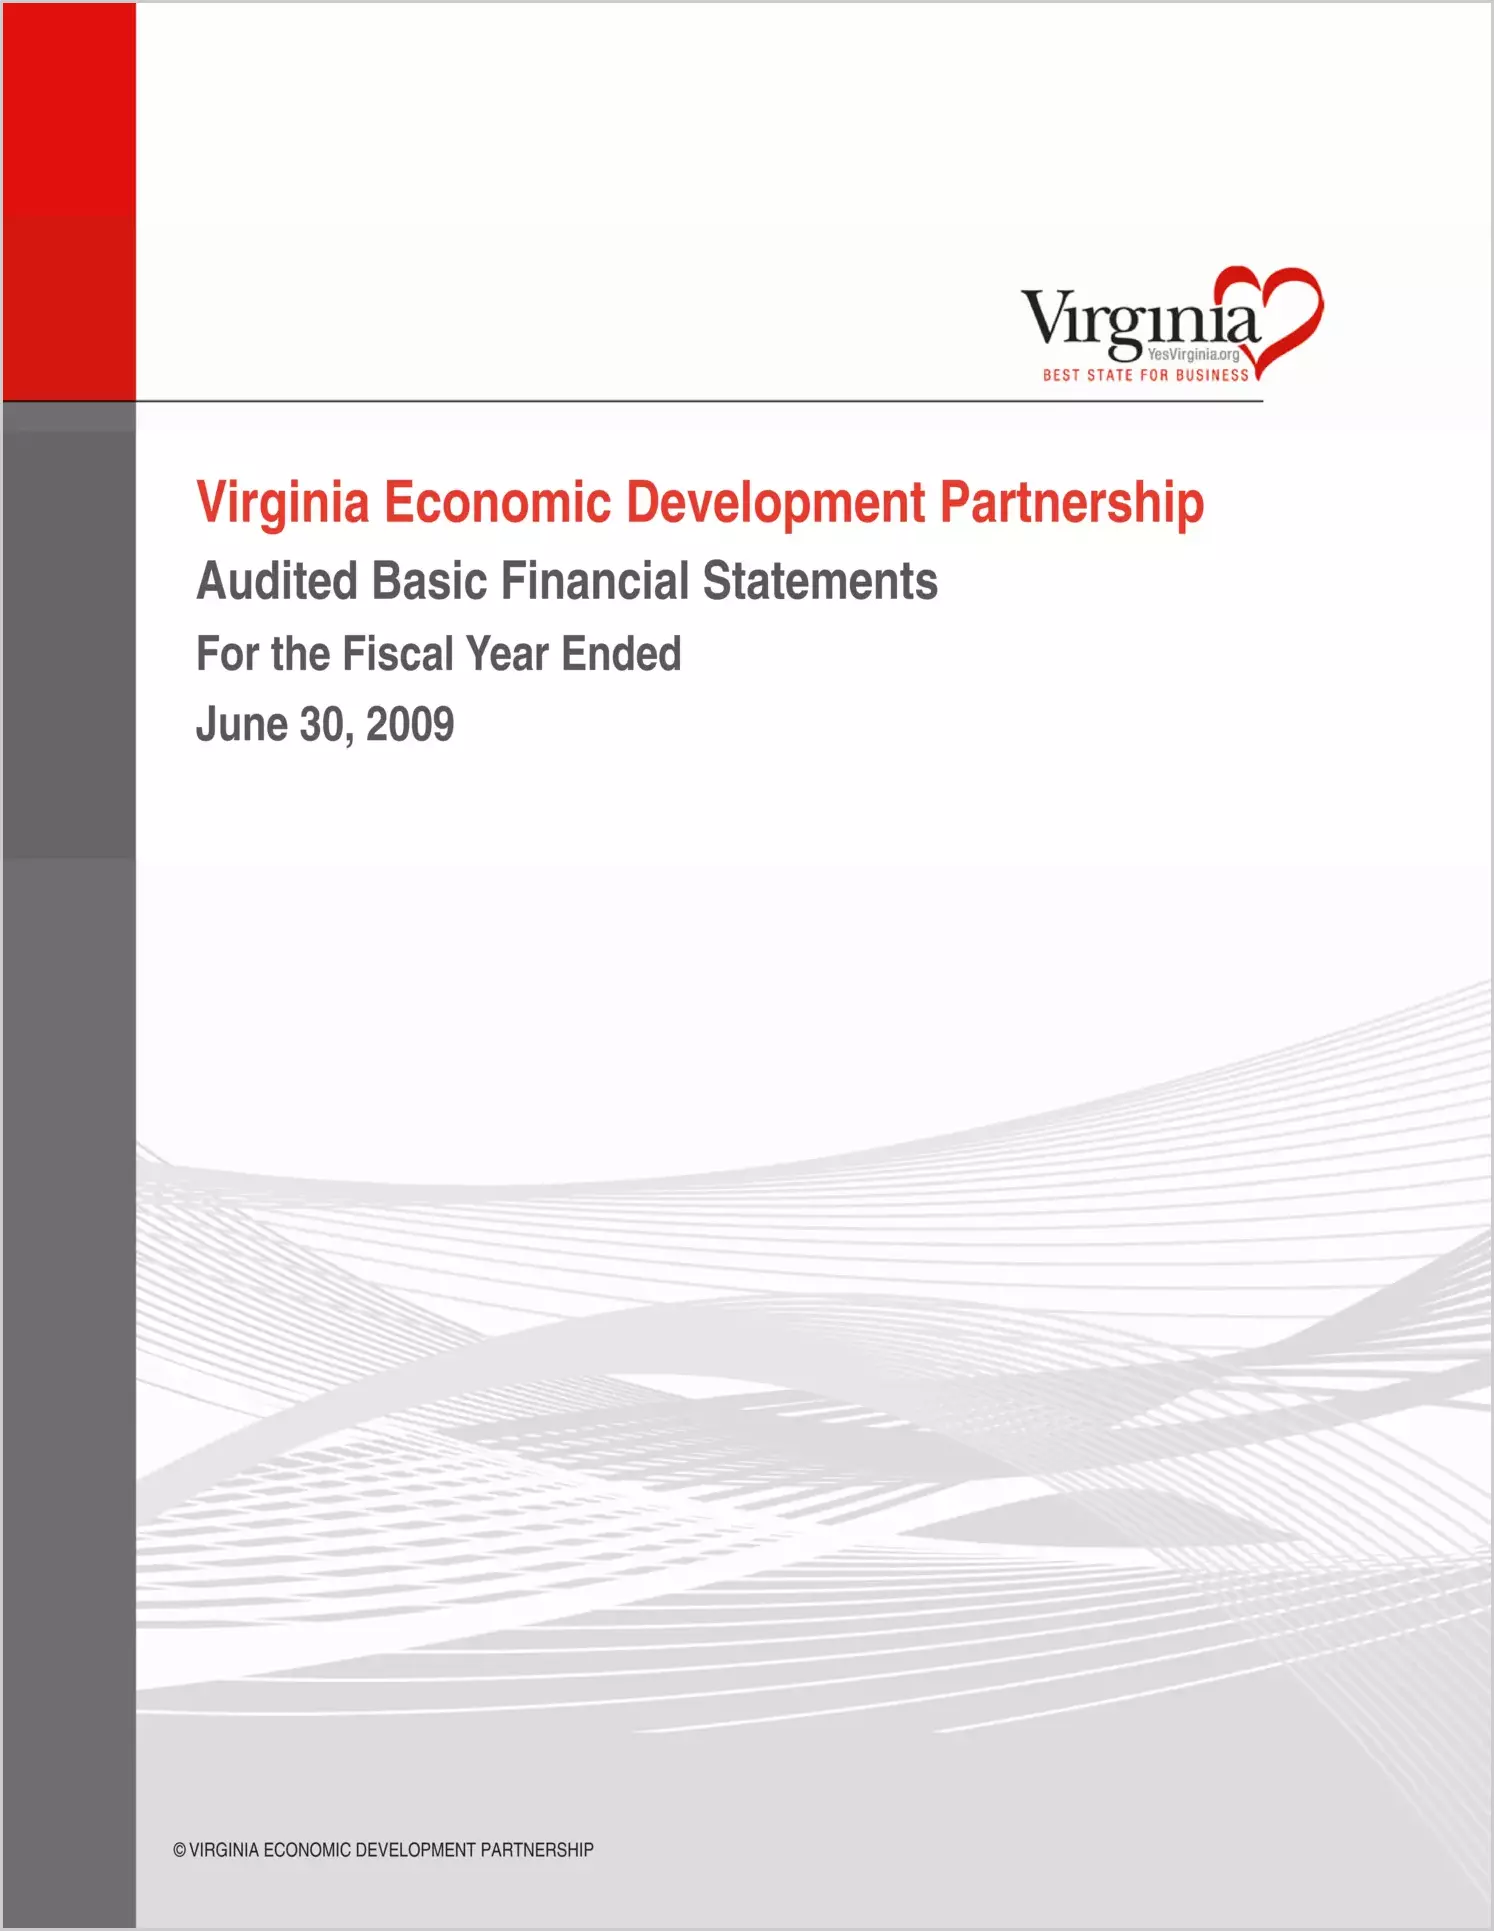 Virginia Economic Development Partnership Audited Basic Financial Statements for the fiscal year ended June 30, 2009